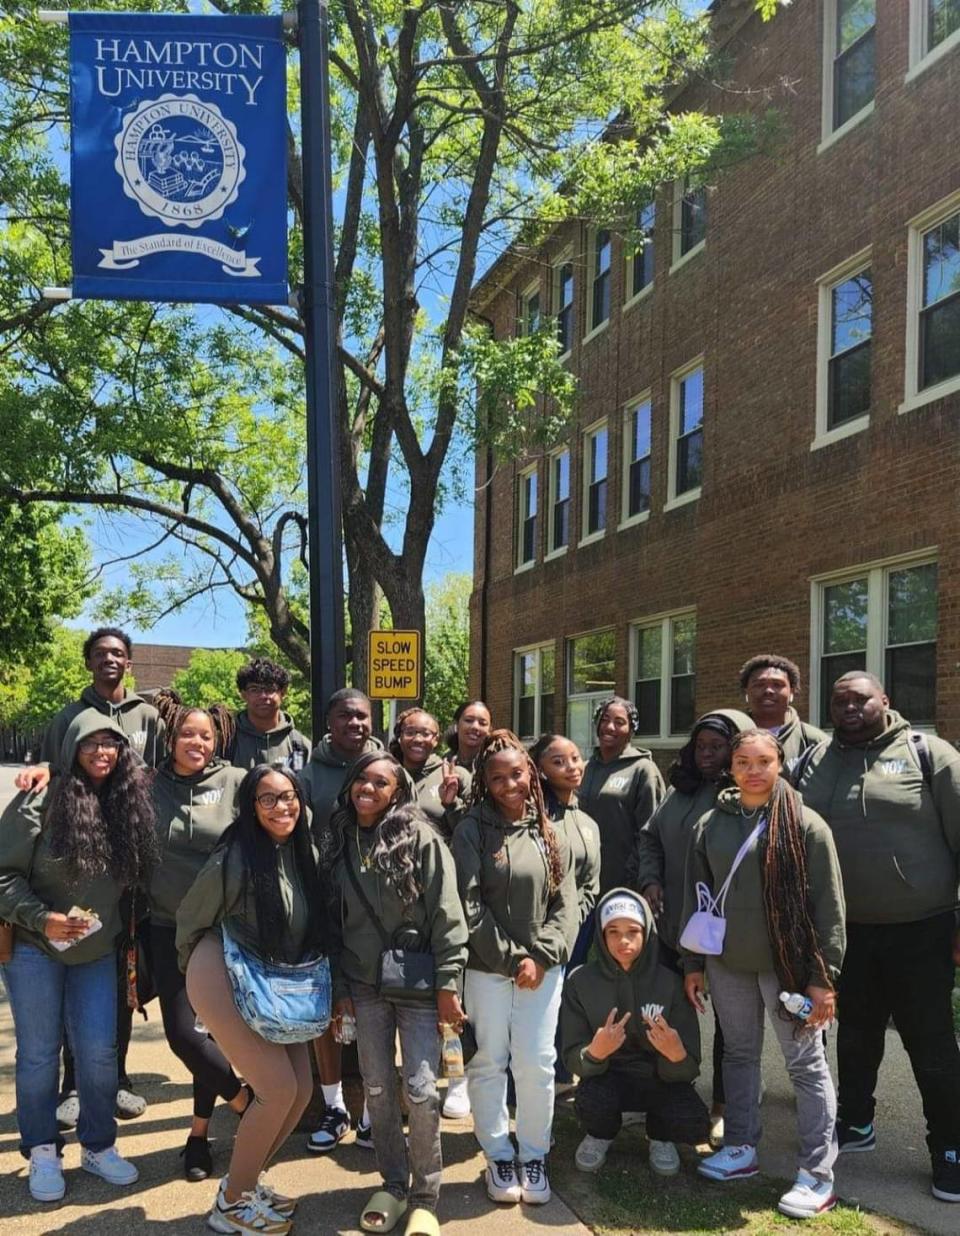 Sacramento-area high school students pose for a photo at Hampton University, a historically Black university, during a recent tour with Voice of the Youth.